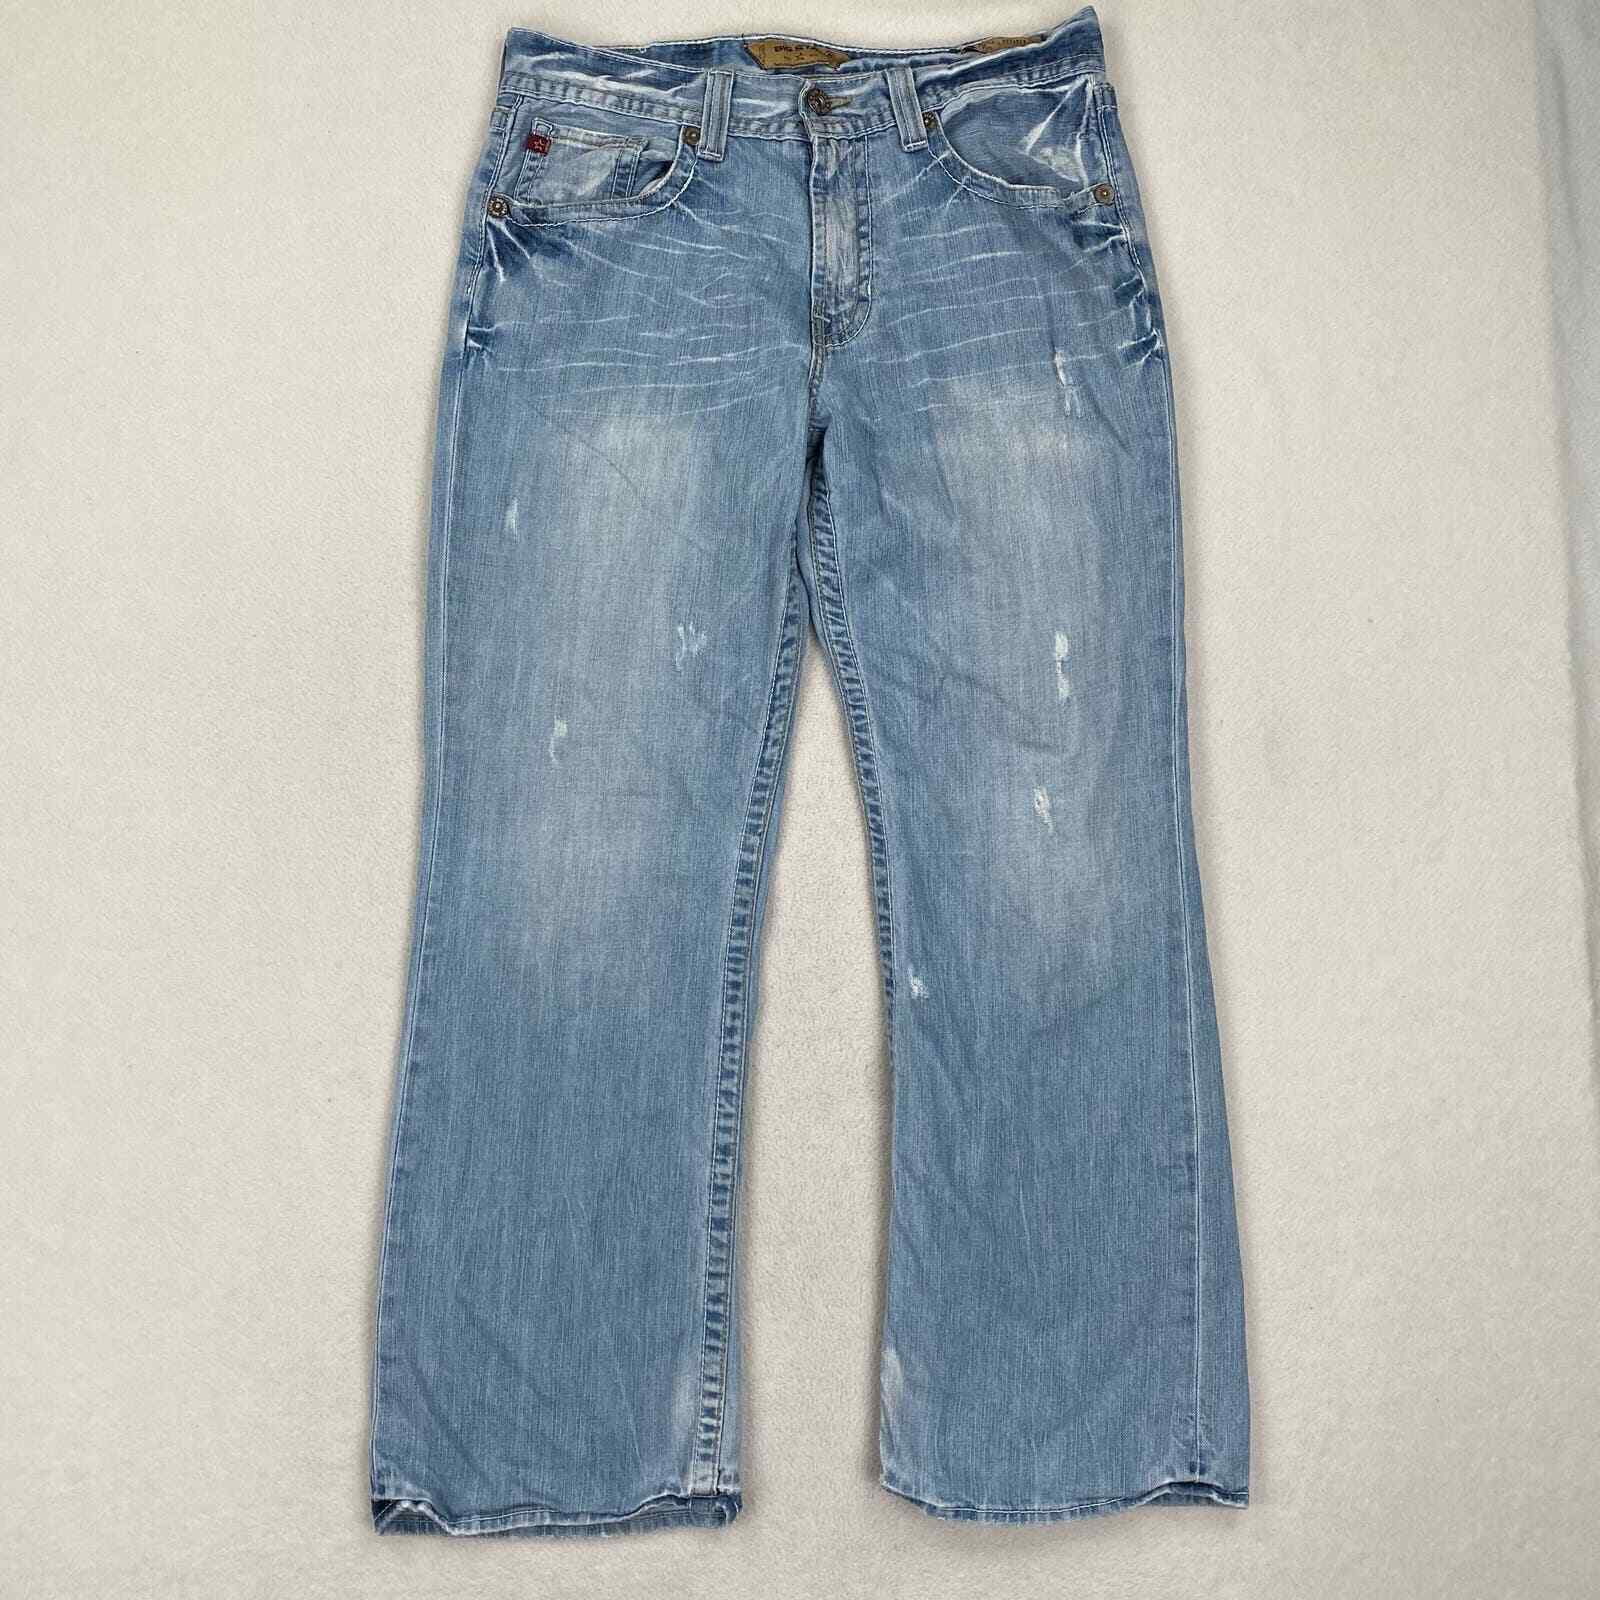 Big Star Jeans Sz 34x31 Light Wash Faded Voyager … - image 1